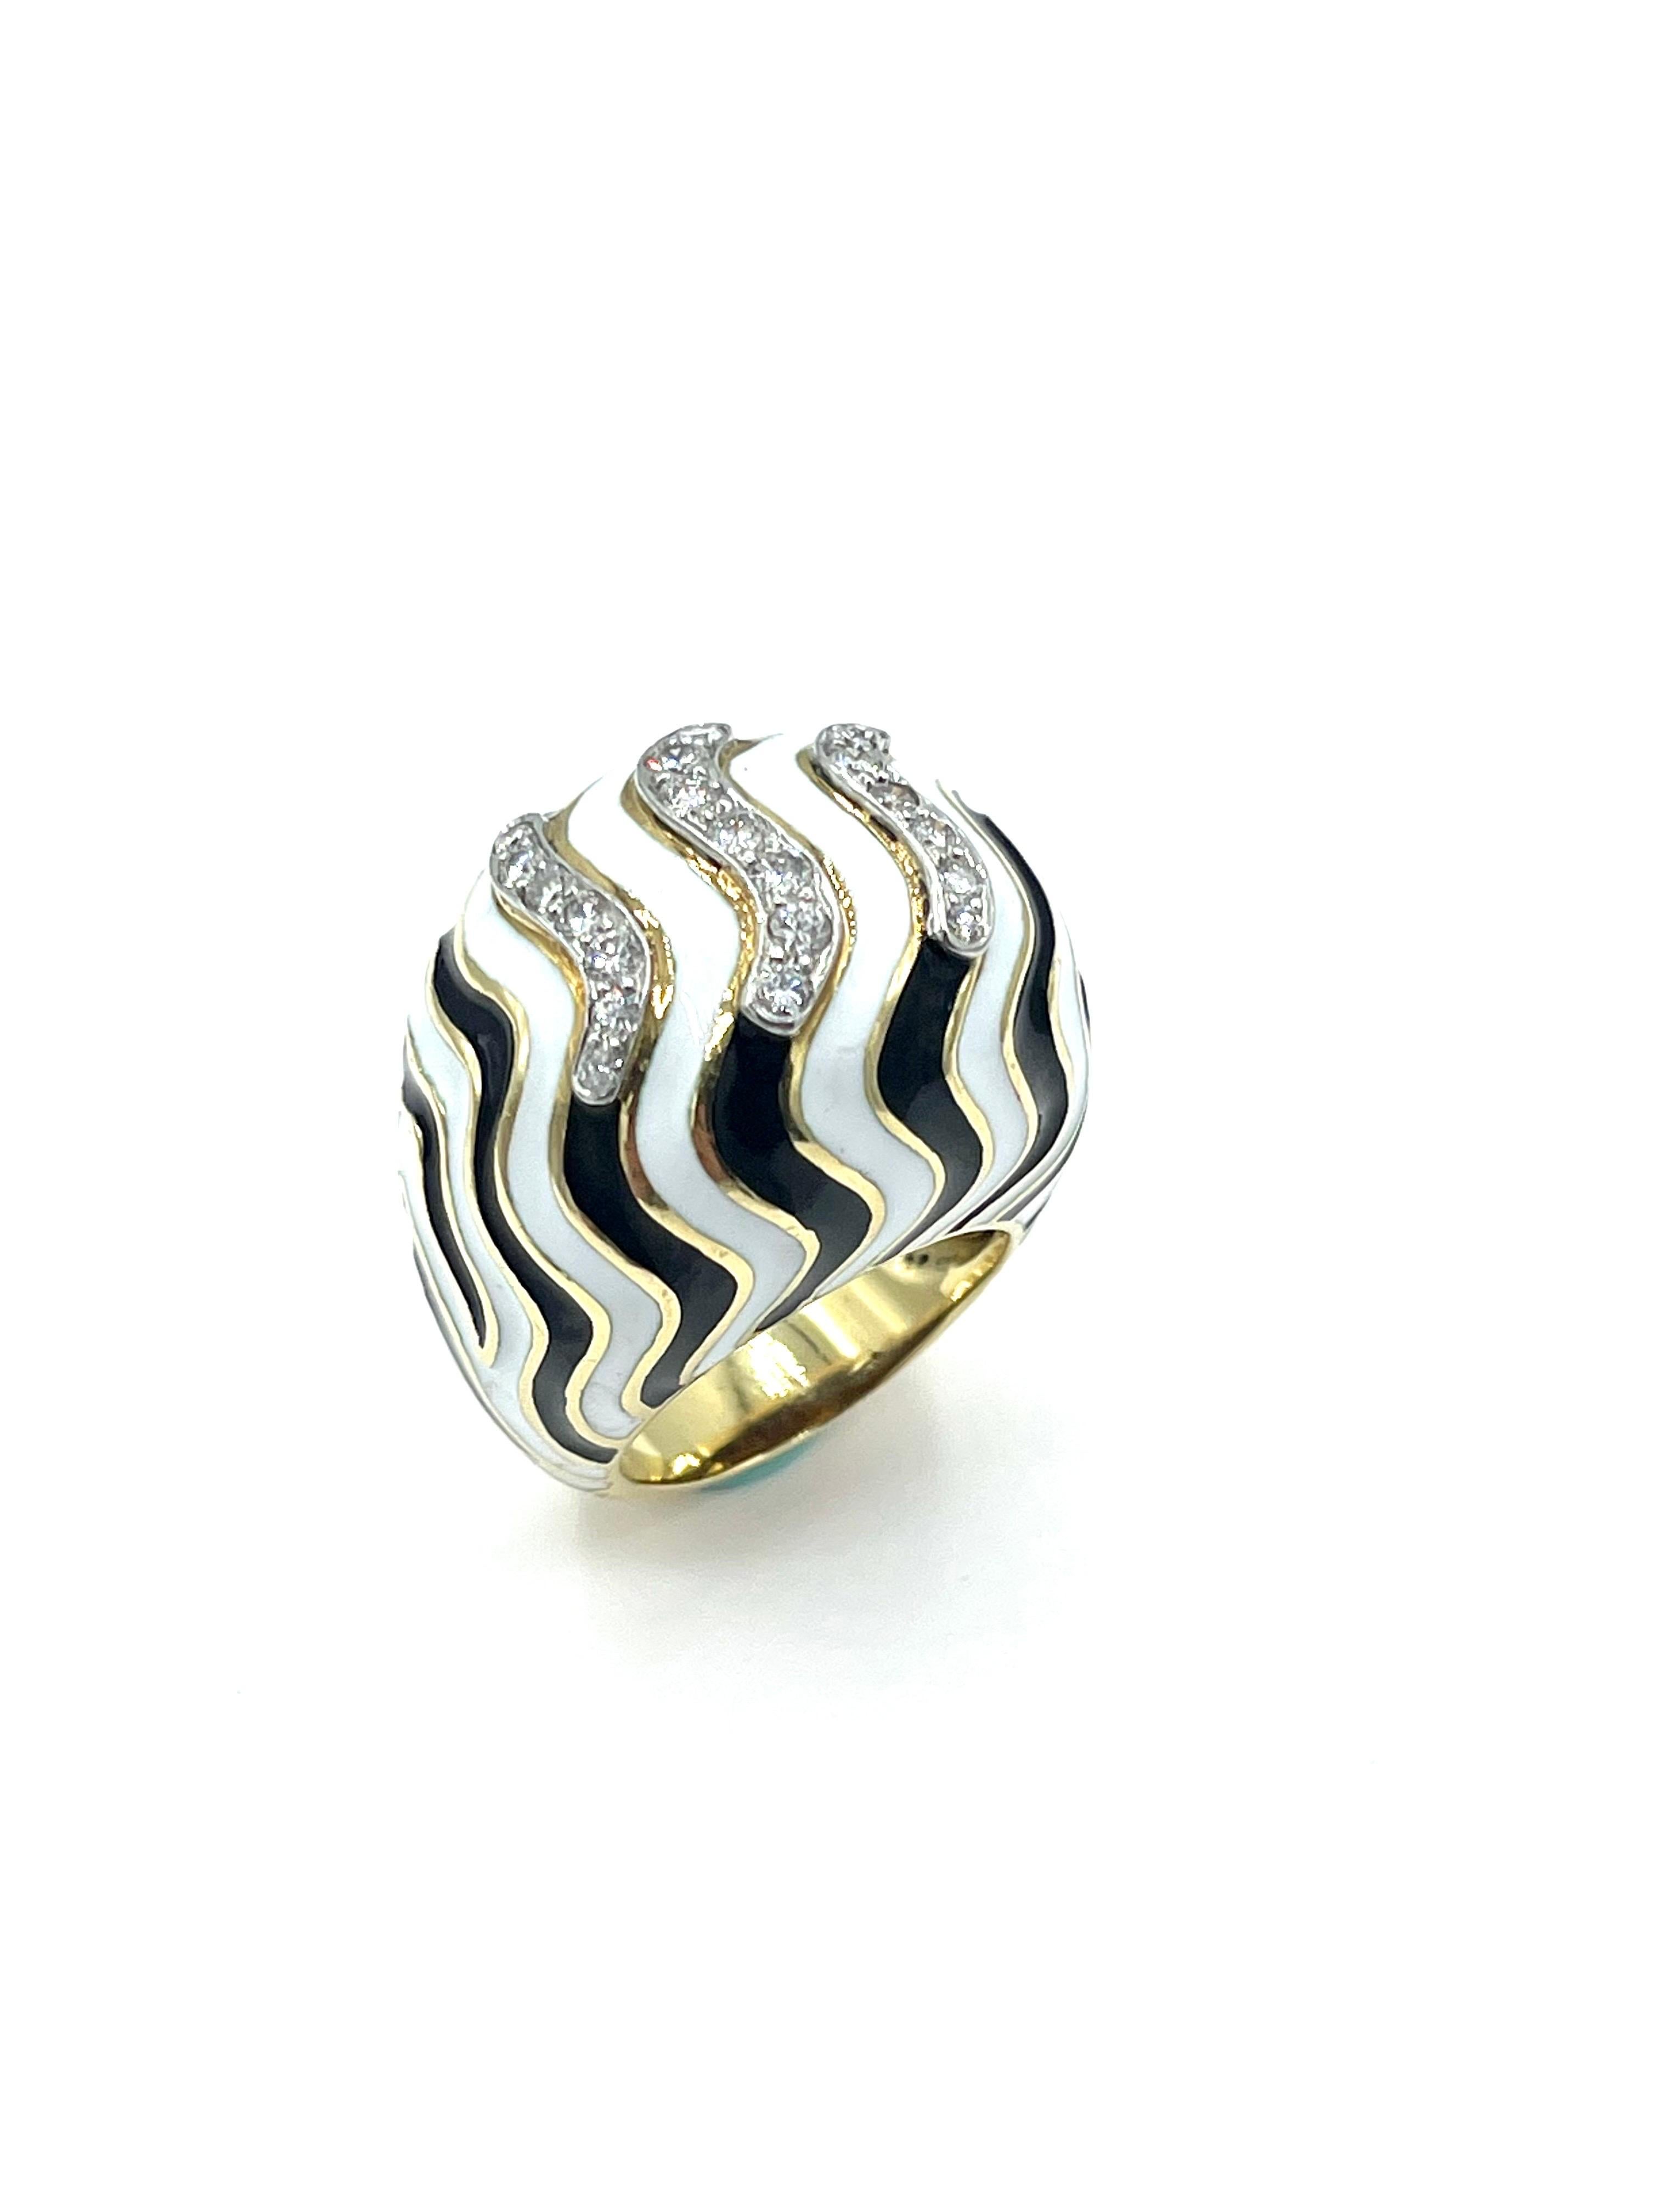 An iconic design by David Webb!  This ring features 21 round brilliant Diamonds set in three curved rows, totaling .50 carats.  They are set on top of the ring surrounded by beautiful black and white enamel, over 18k yellow gold.  The Diamonds are